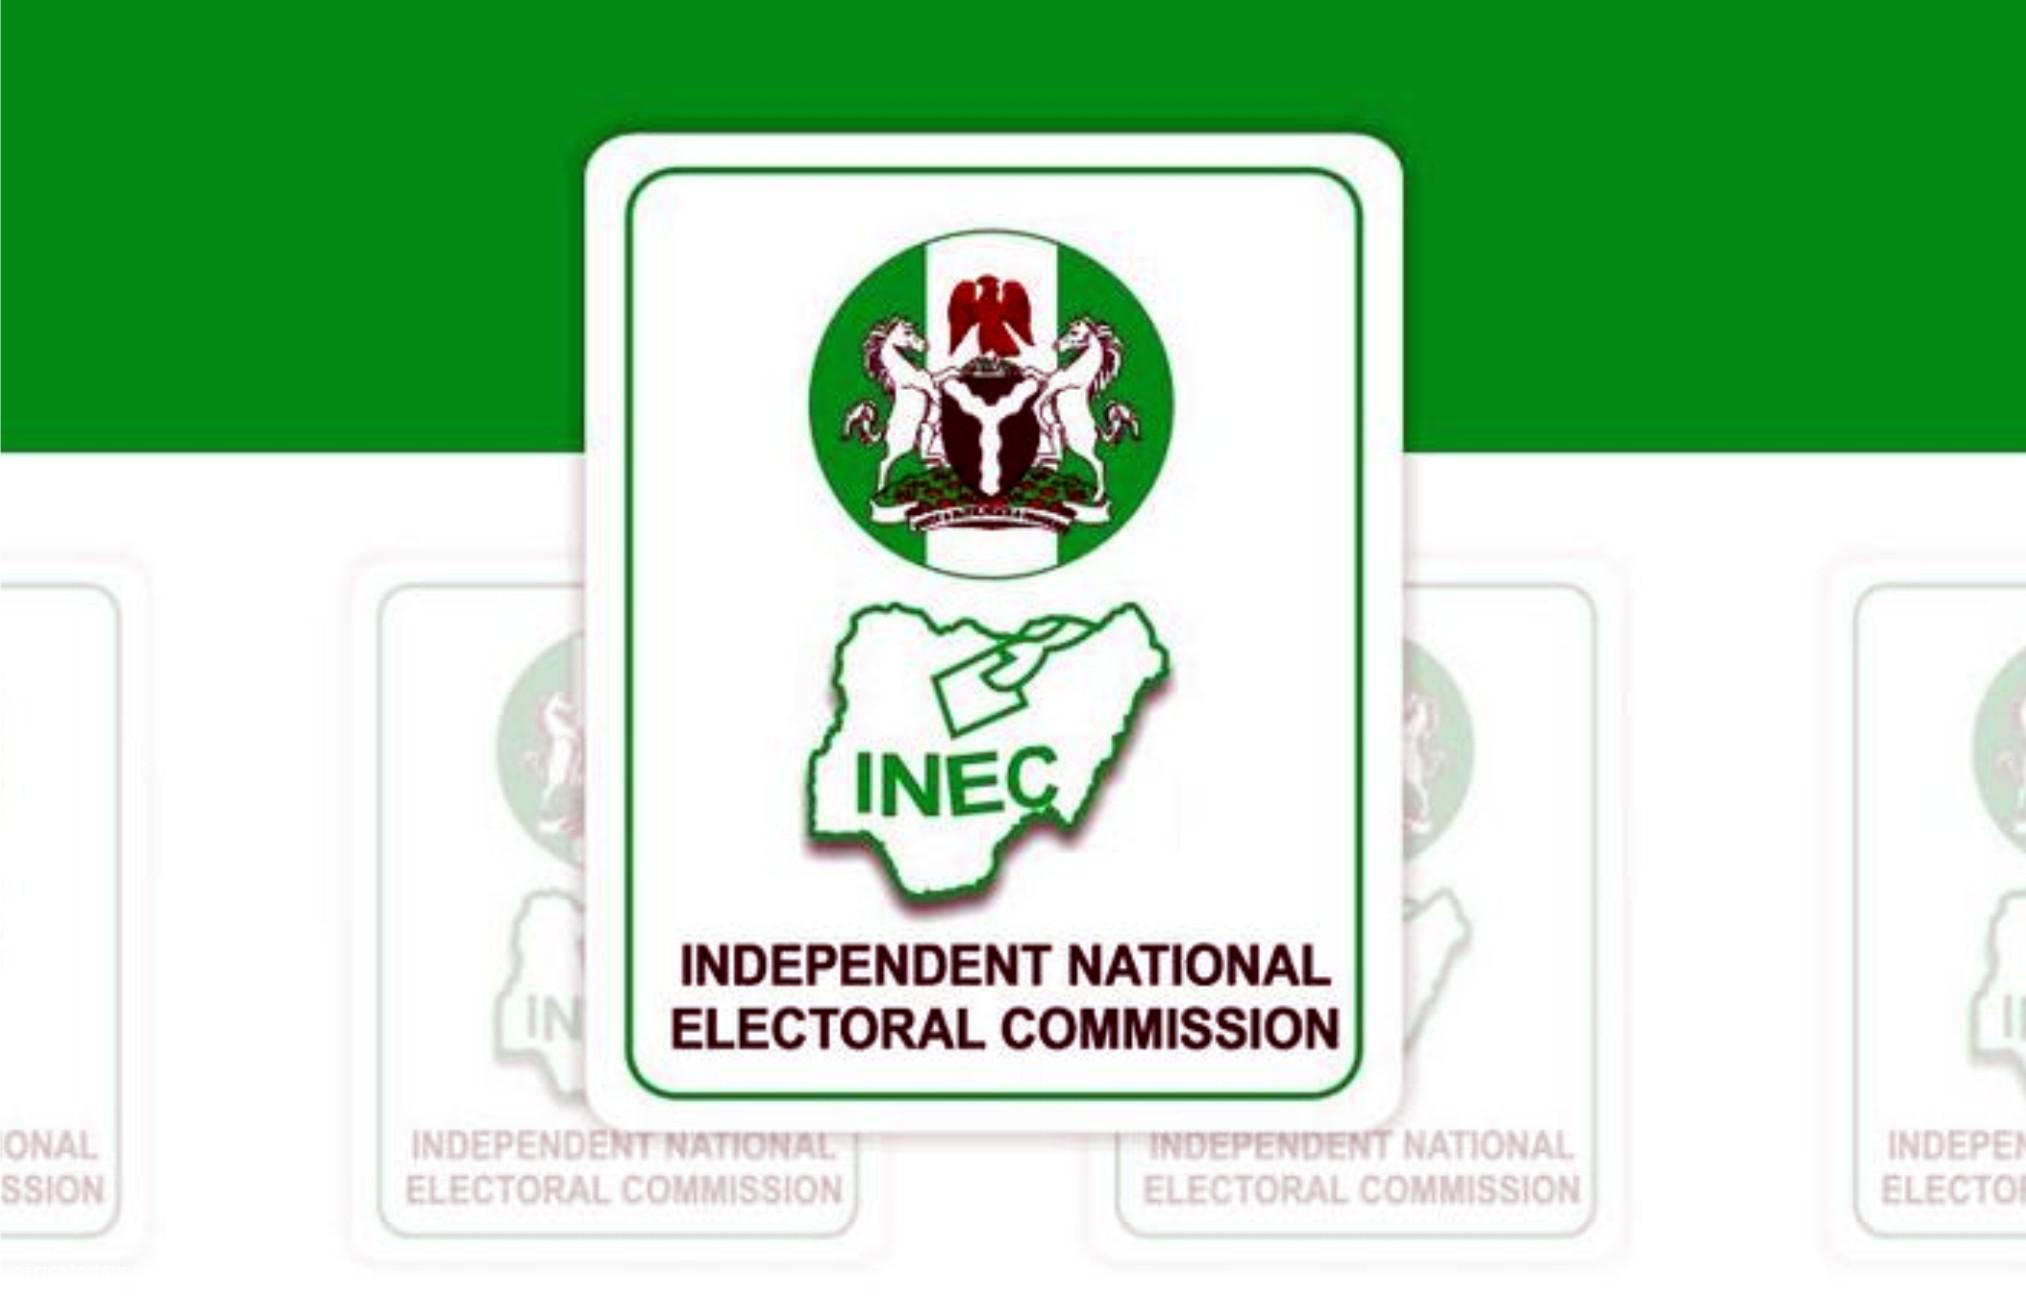 Voting Rights For Prison Inmates Won't Be Extended - INEC